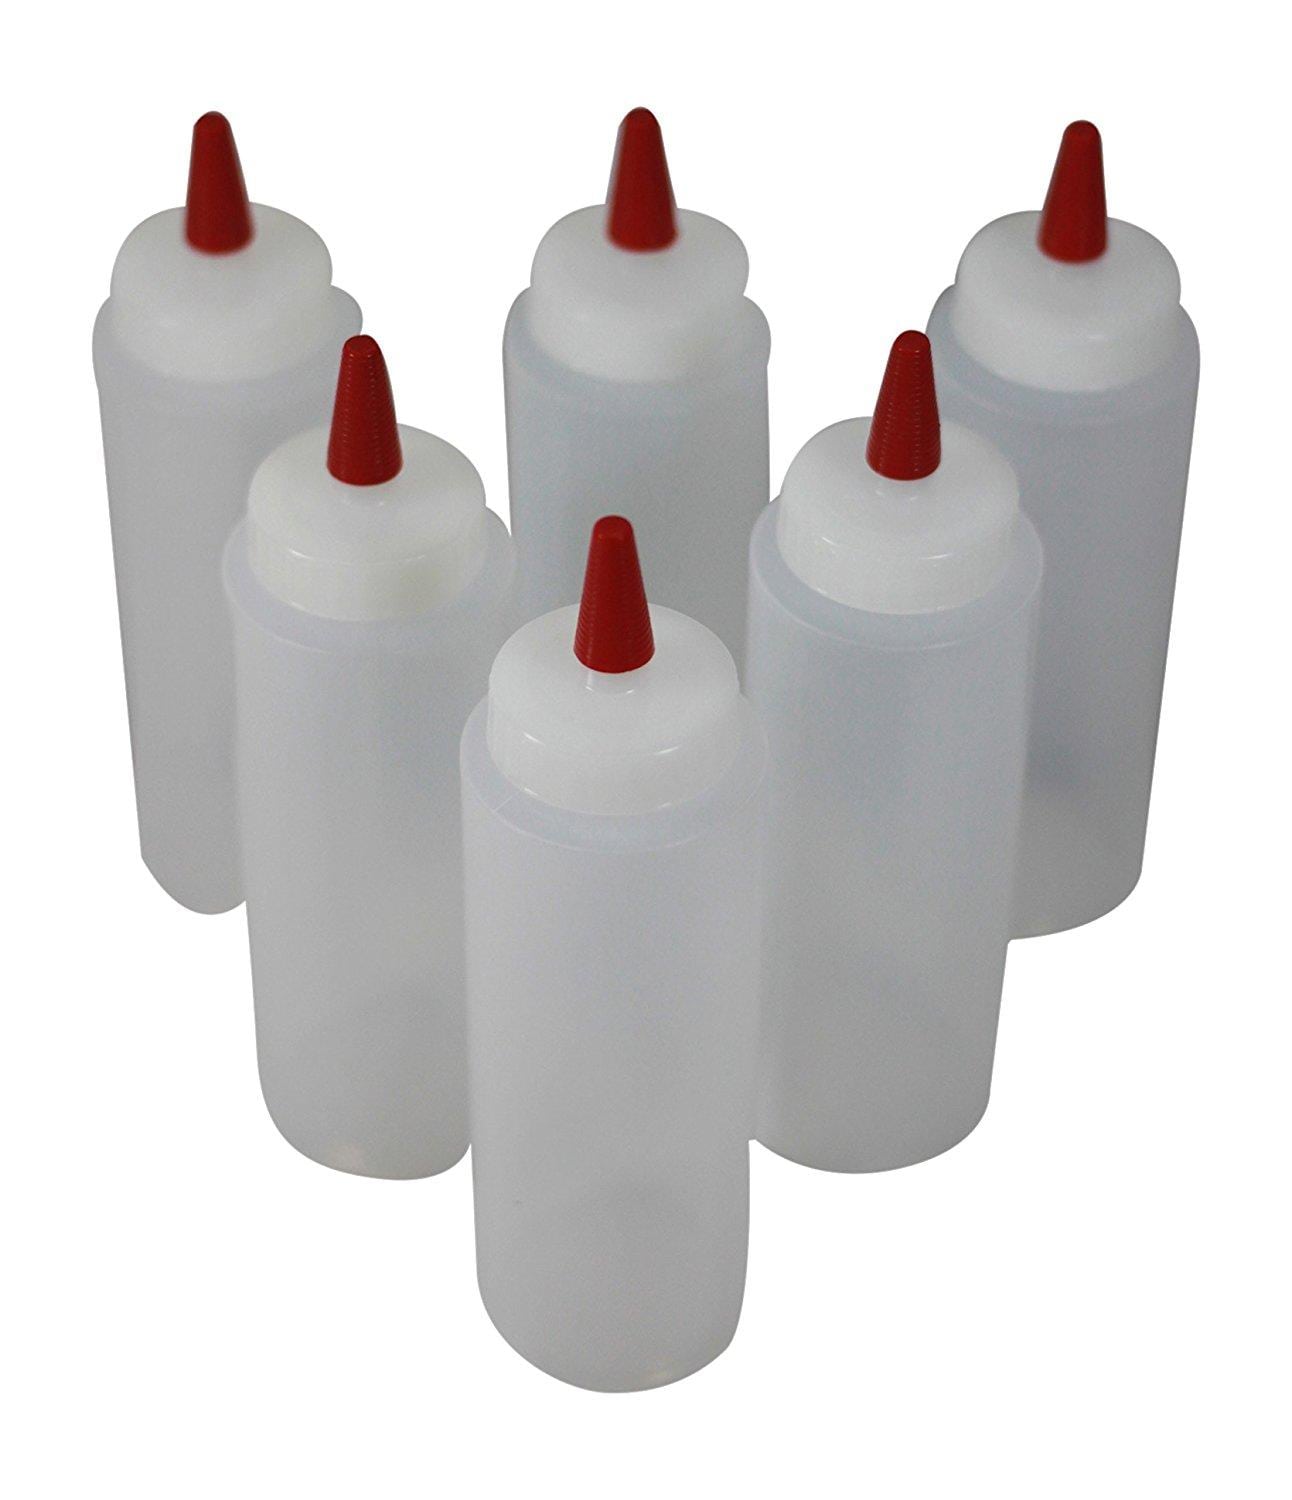 Easy squeeze bottles, perfect for decorating cookies. Royal icing